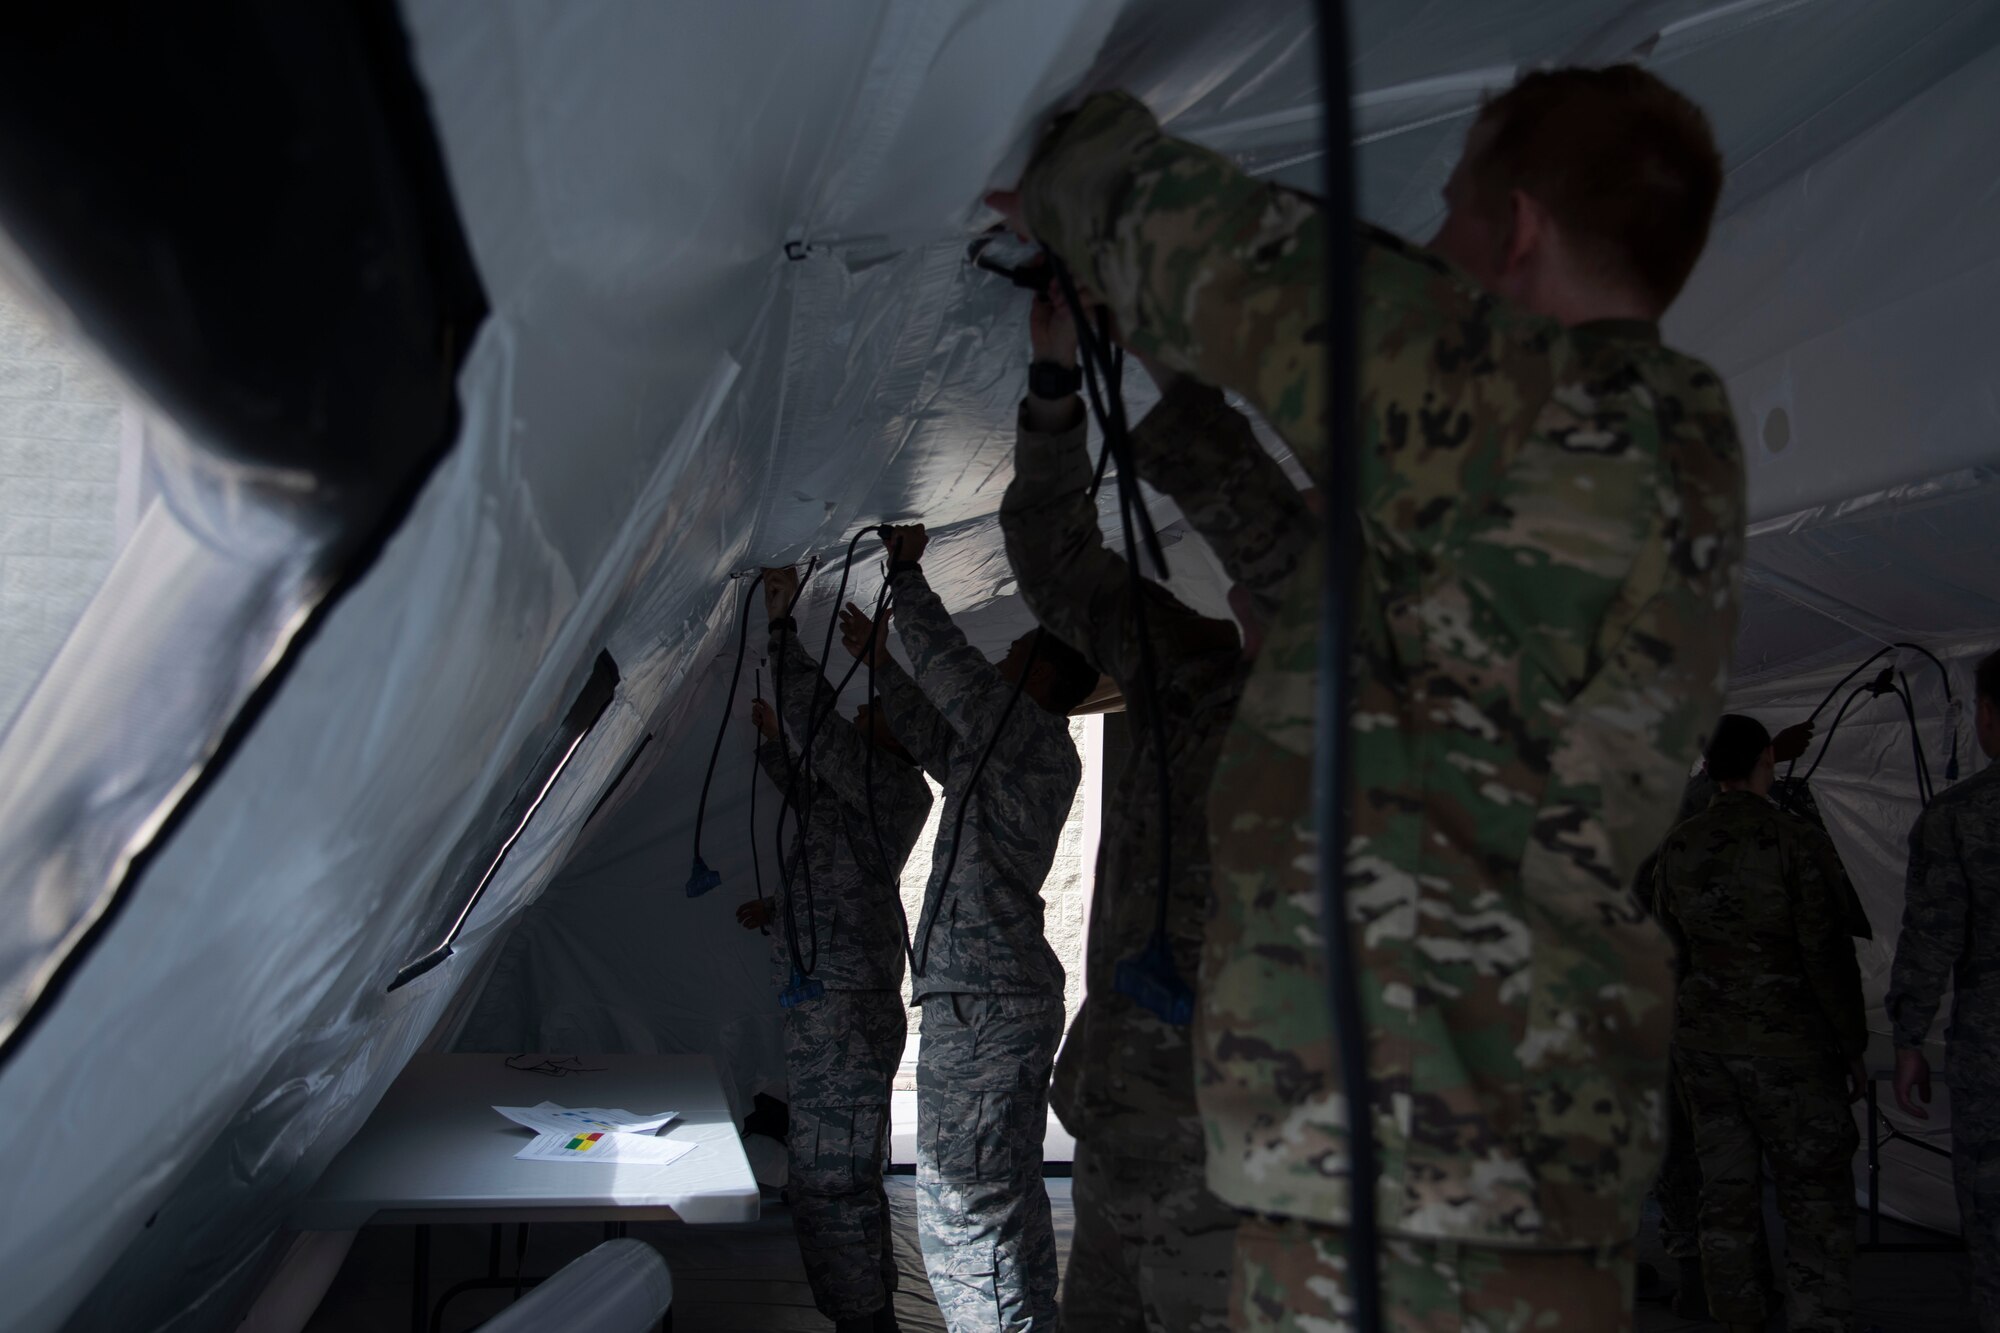 366th Fighter Wing A2 (Intell) Airmen line the ceiling of the TM60 tent with power cables, June 3, 2020, on Mountain Home Air Force Base, Idaho,. A fully functional Agile Combat Employment Mission Planning Cell will include computers with full internet access and an heating ventalation and air conditioning system. (U.S. Air Force photo by Airman 1st Class Nicholas Swift)